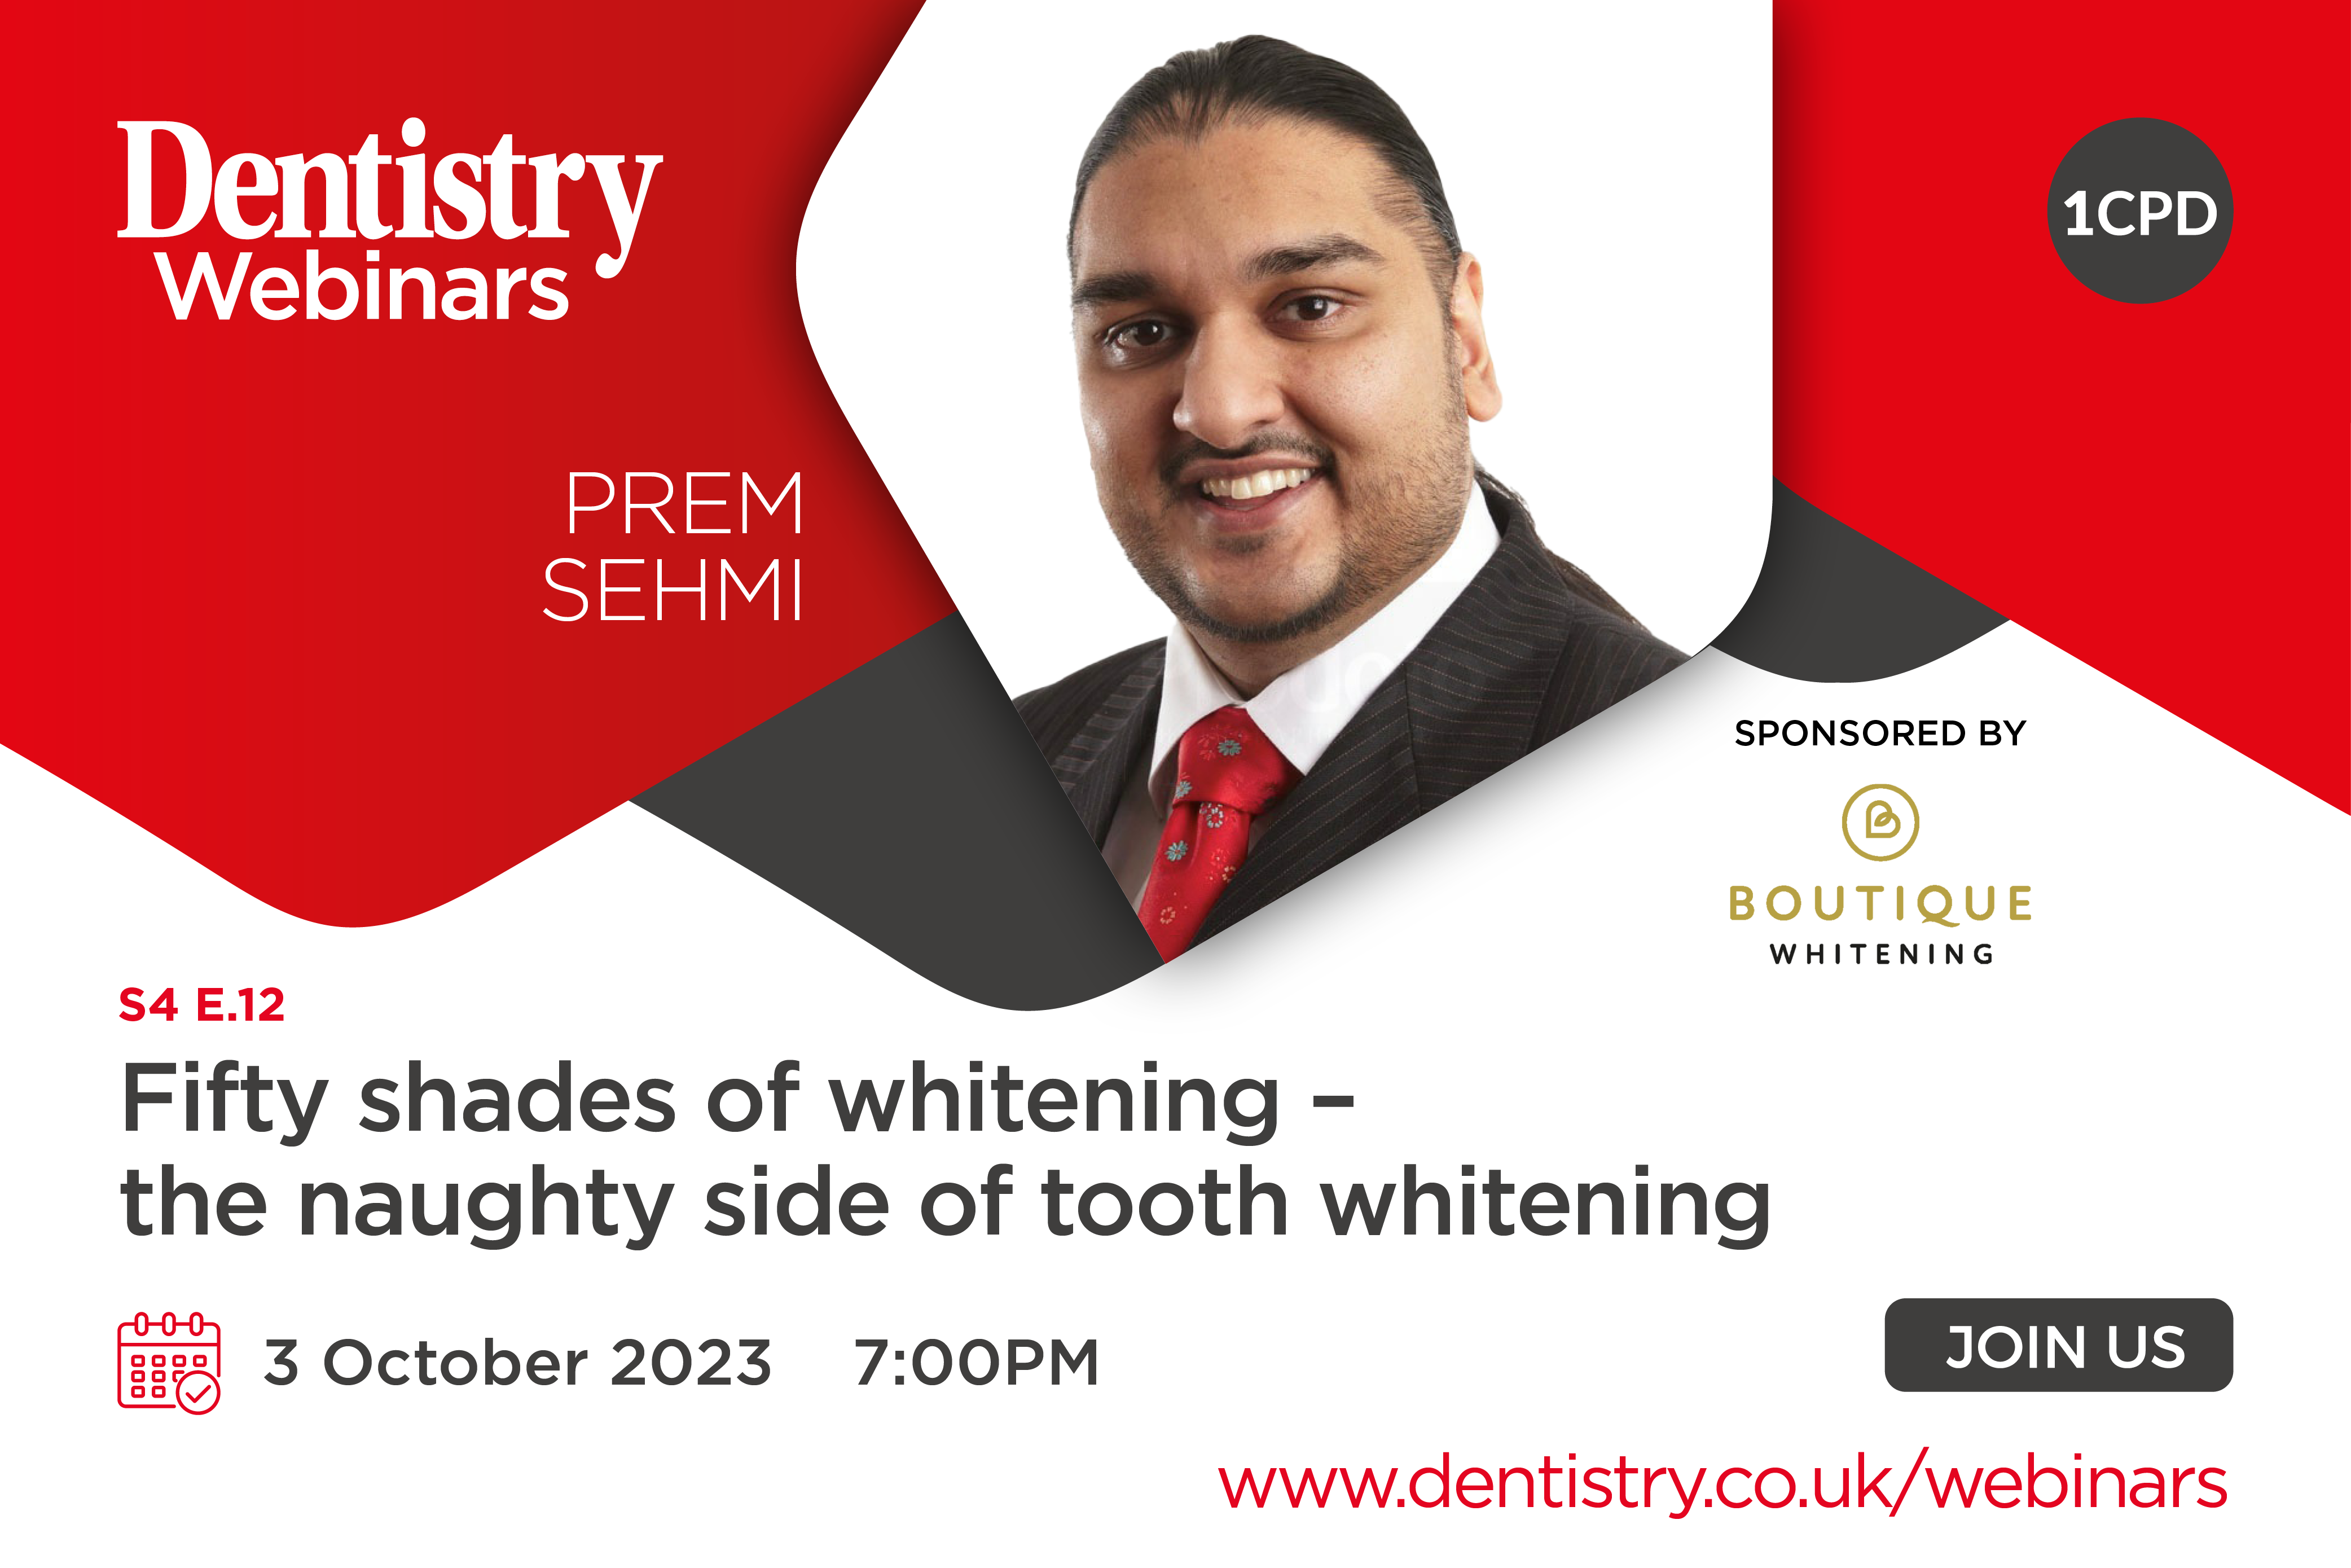 Join Prem Sehmi on Tuesday 3 October at 7pm as he discusses fifty shades of whitening – the naughty side of tooth whitening.